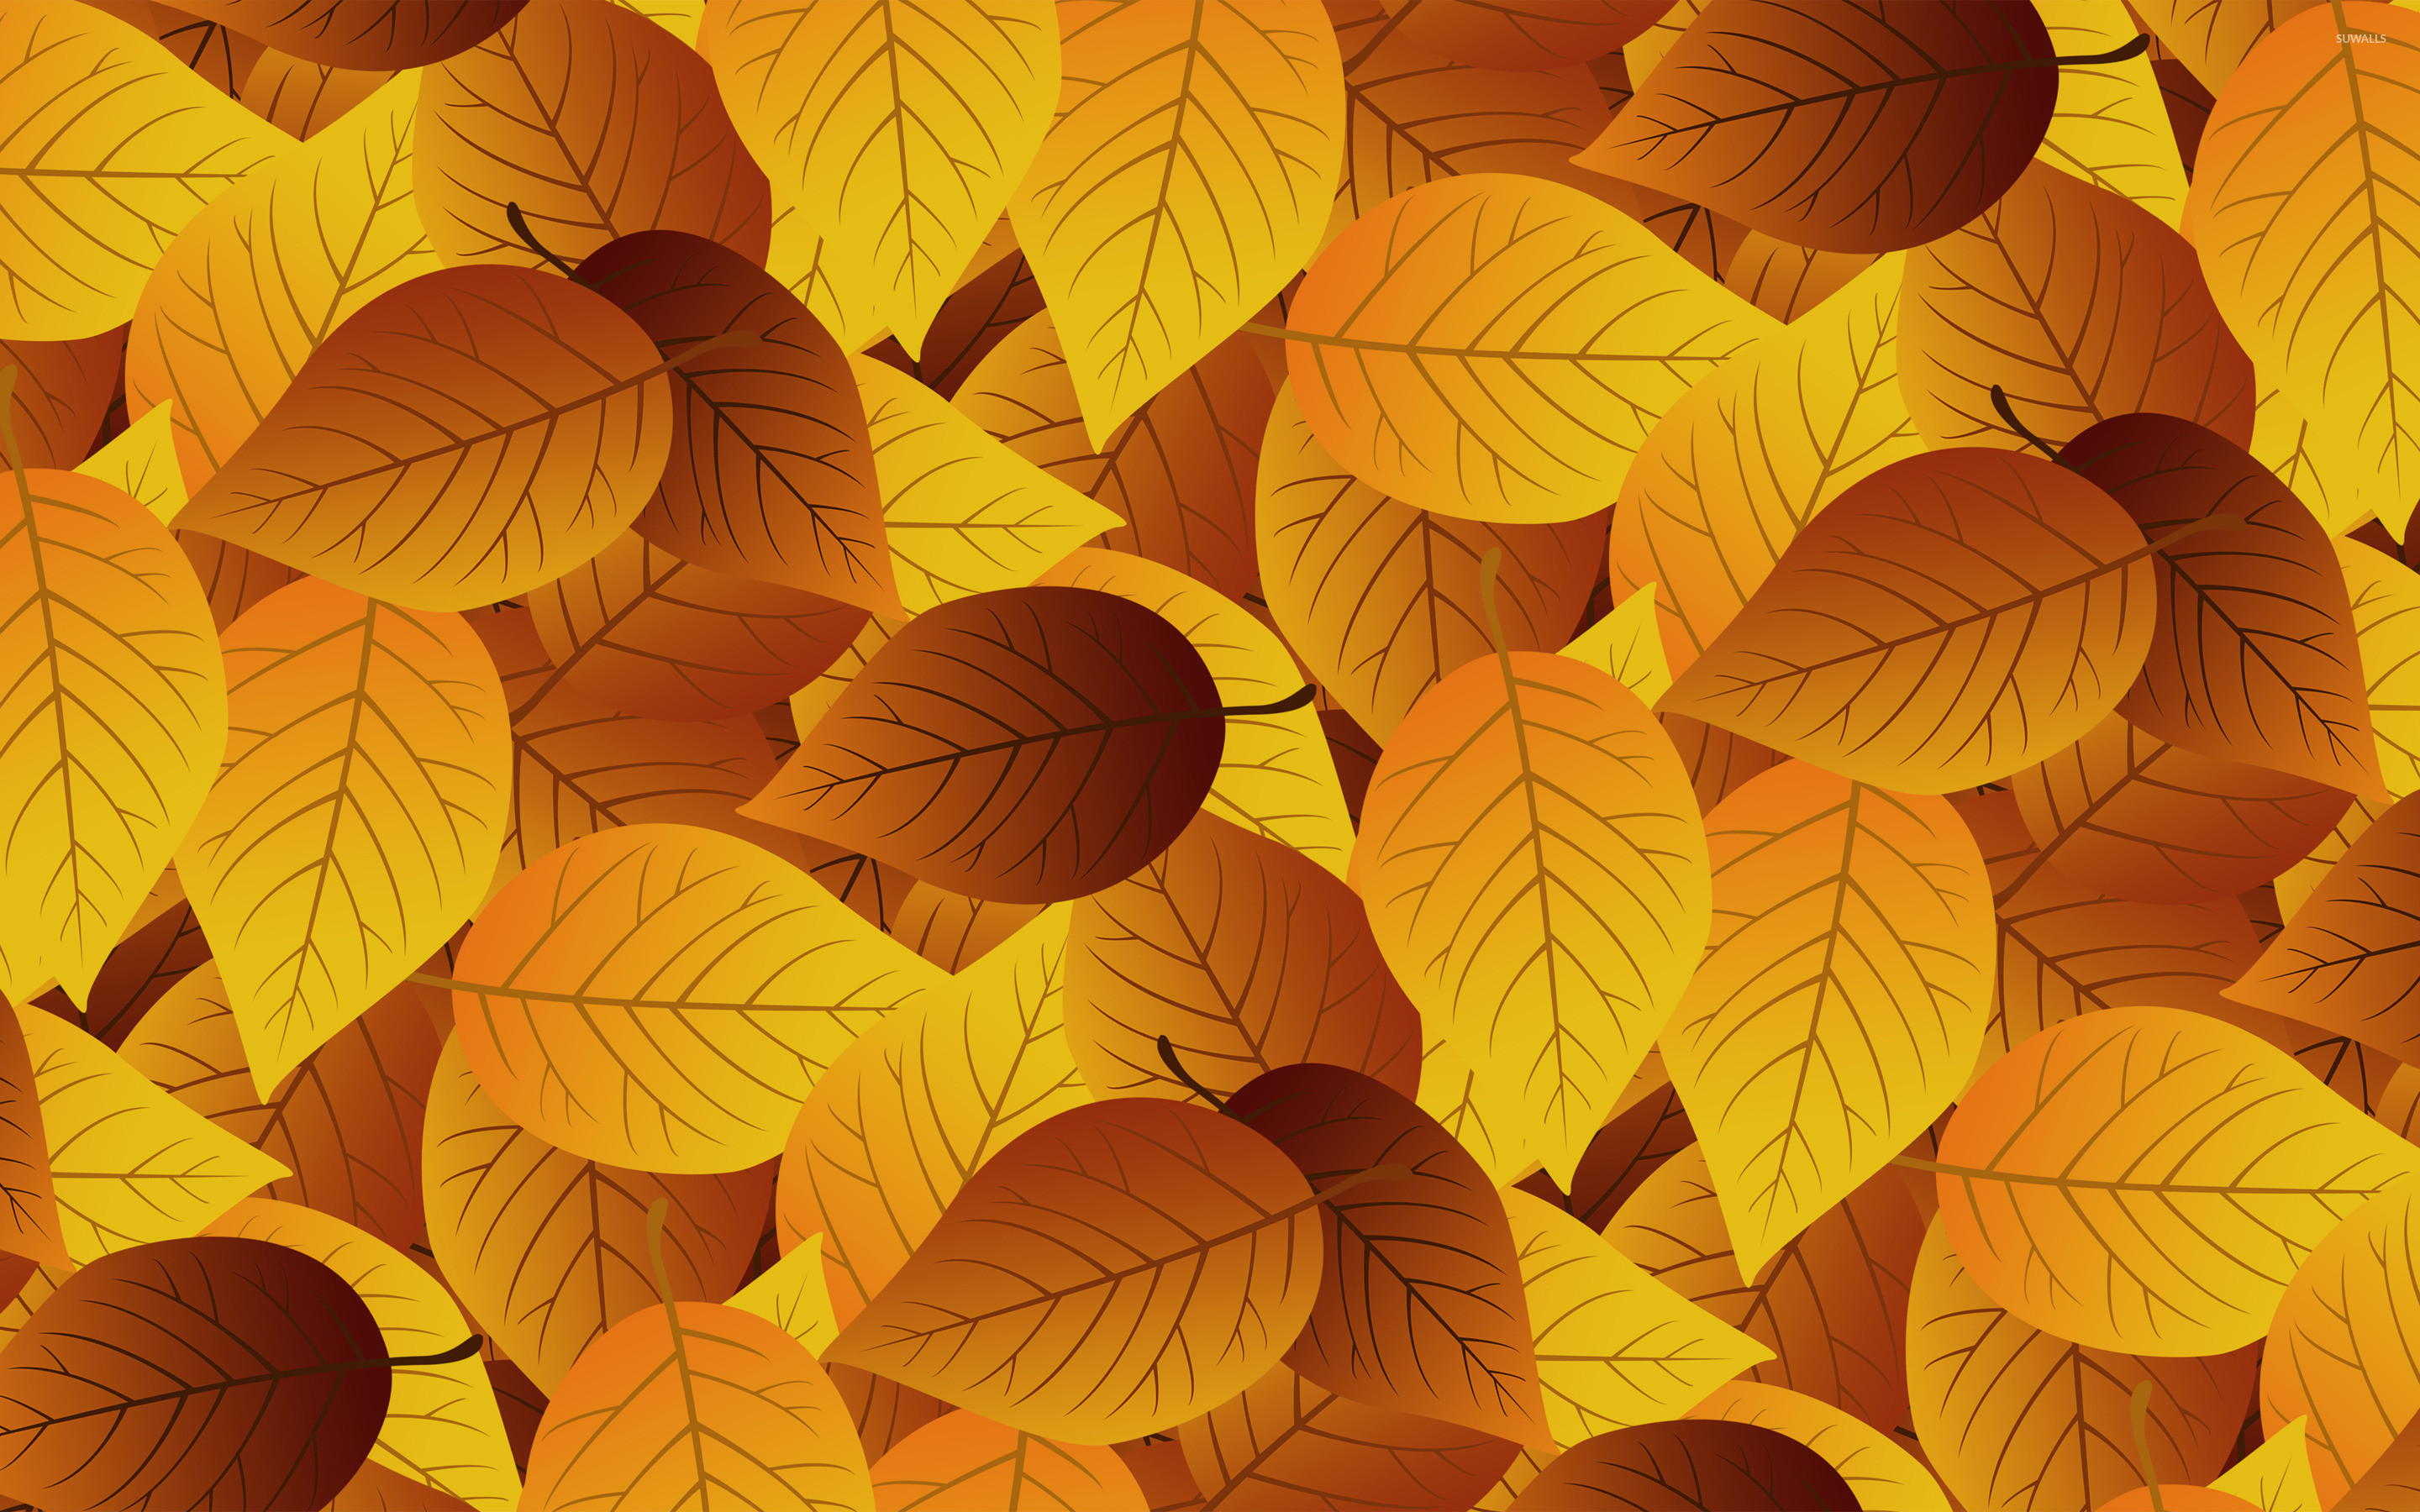 2880x1800 ... Fall Leaves | Fall Leaves Images, Pictures, Wallpapers on  atgbcentral.com ...